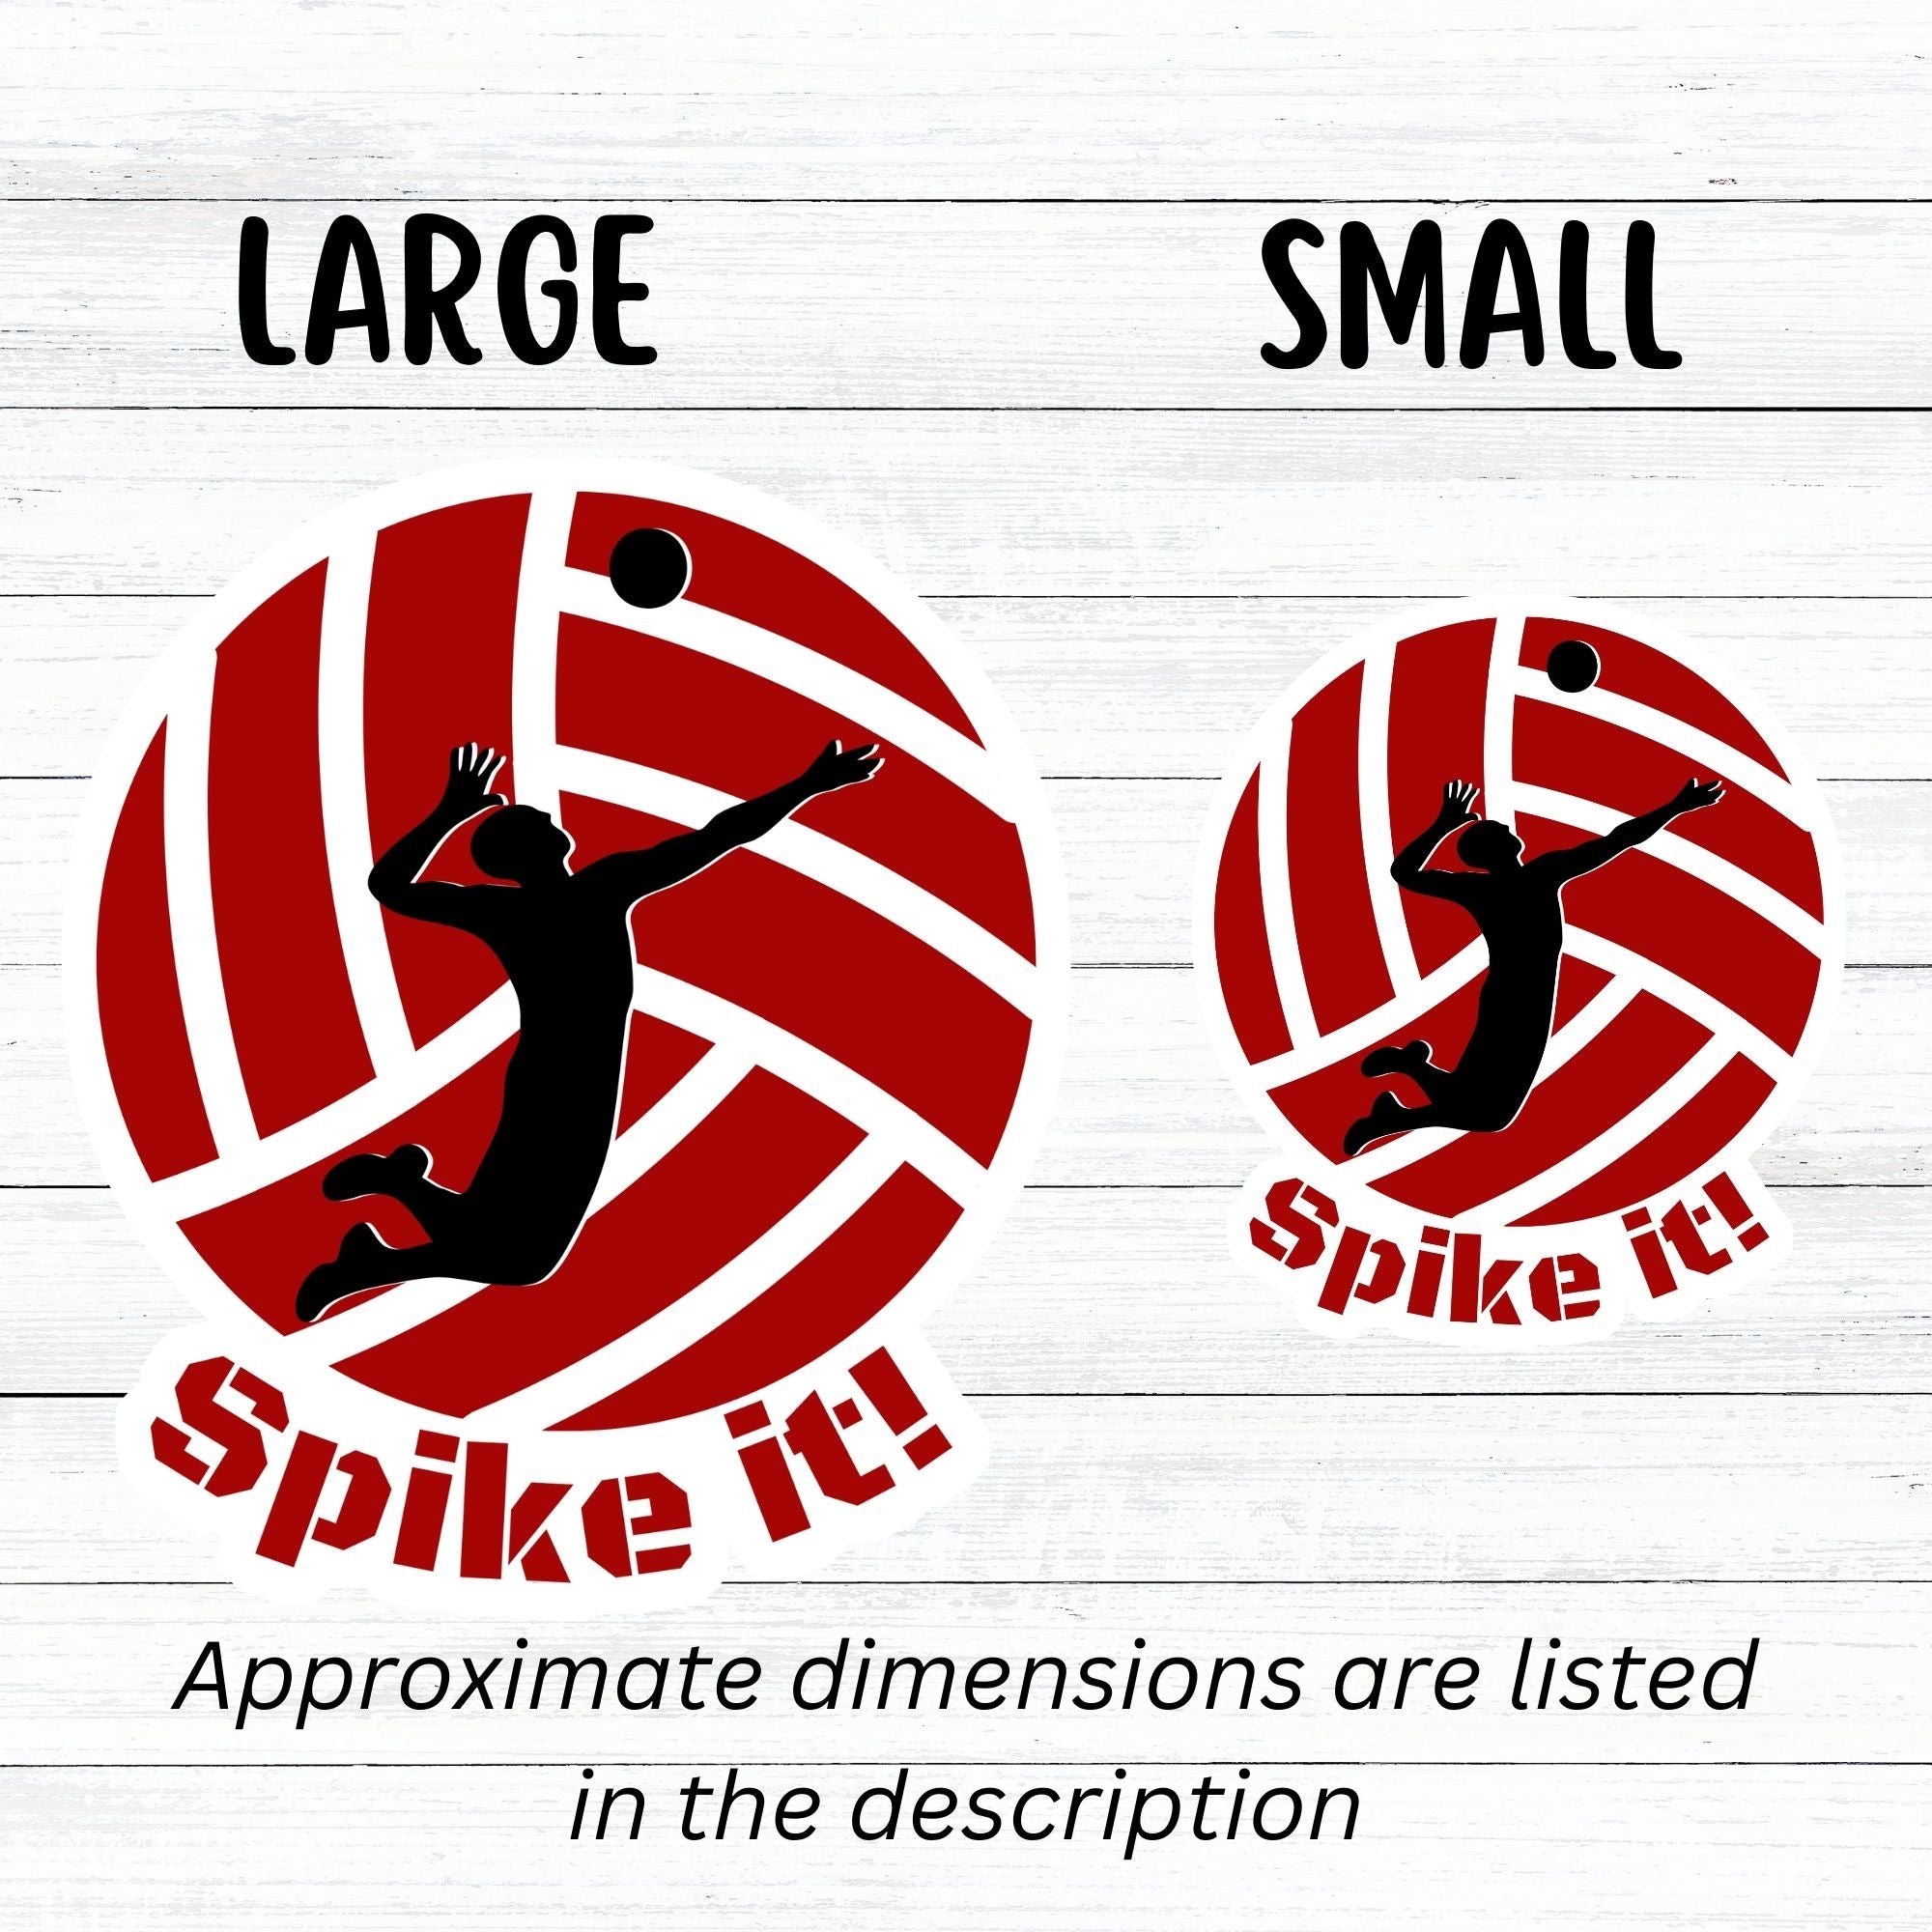 Show your love of volleyball with this individual die-cut sticker! This sticker shows the silhouette of a player about to spike the ball, on a maroon and white volleyball background, with the words "Spike it!" below. This image shows the large and small volleyball stickers next to each other.